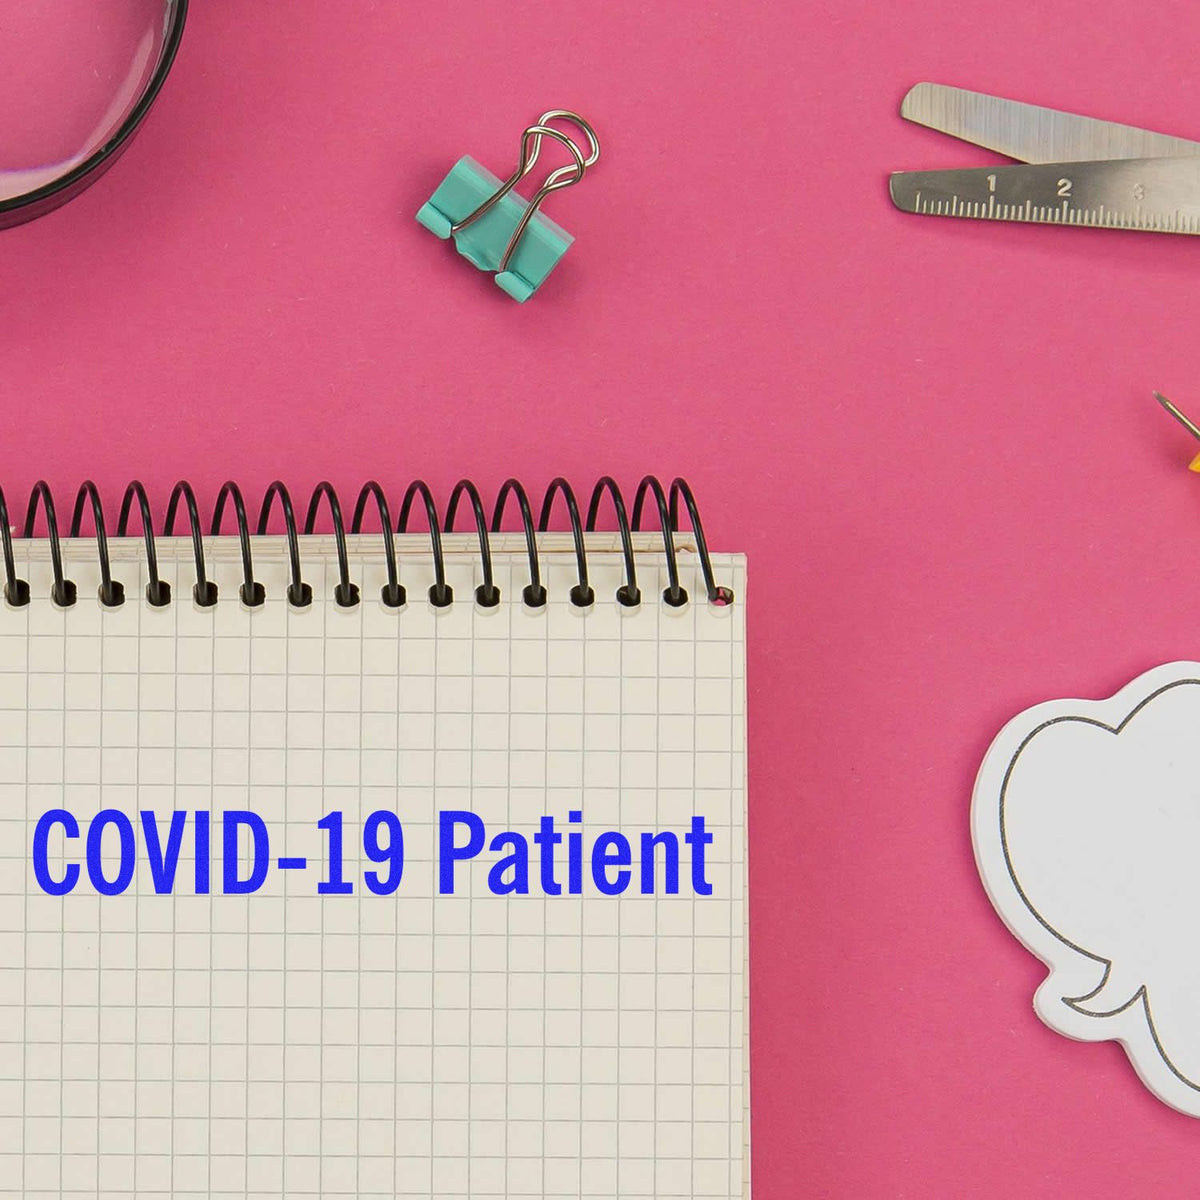 Covid-19 Patient Rubber Stamp In Use Photo